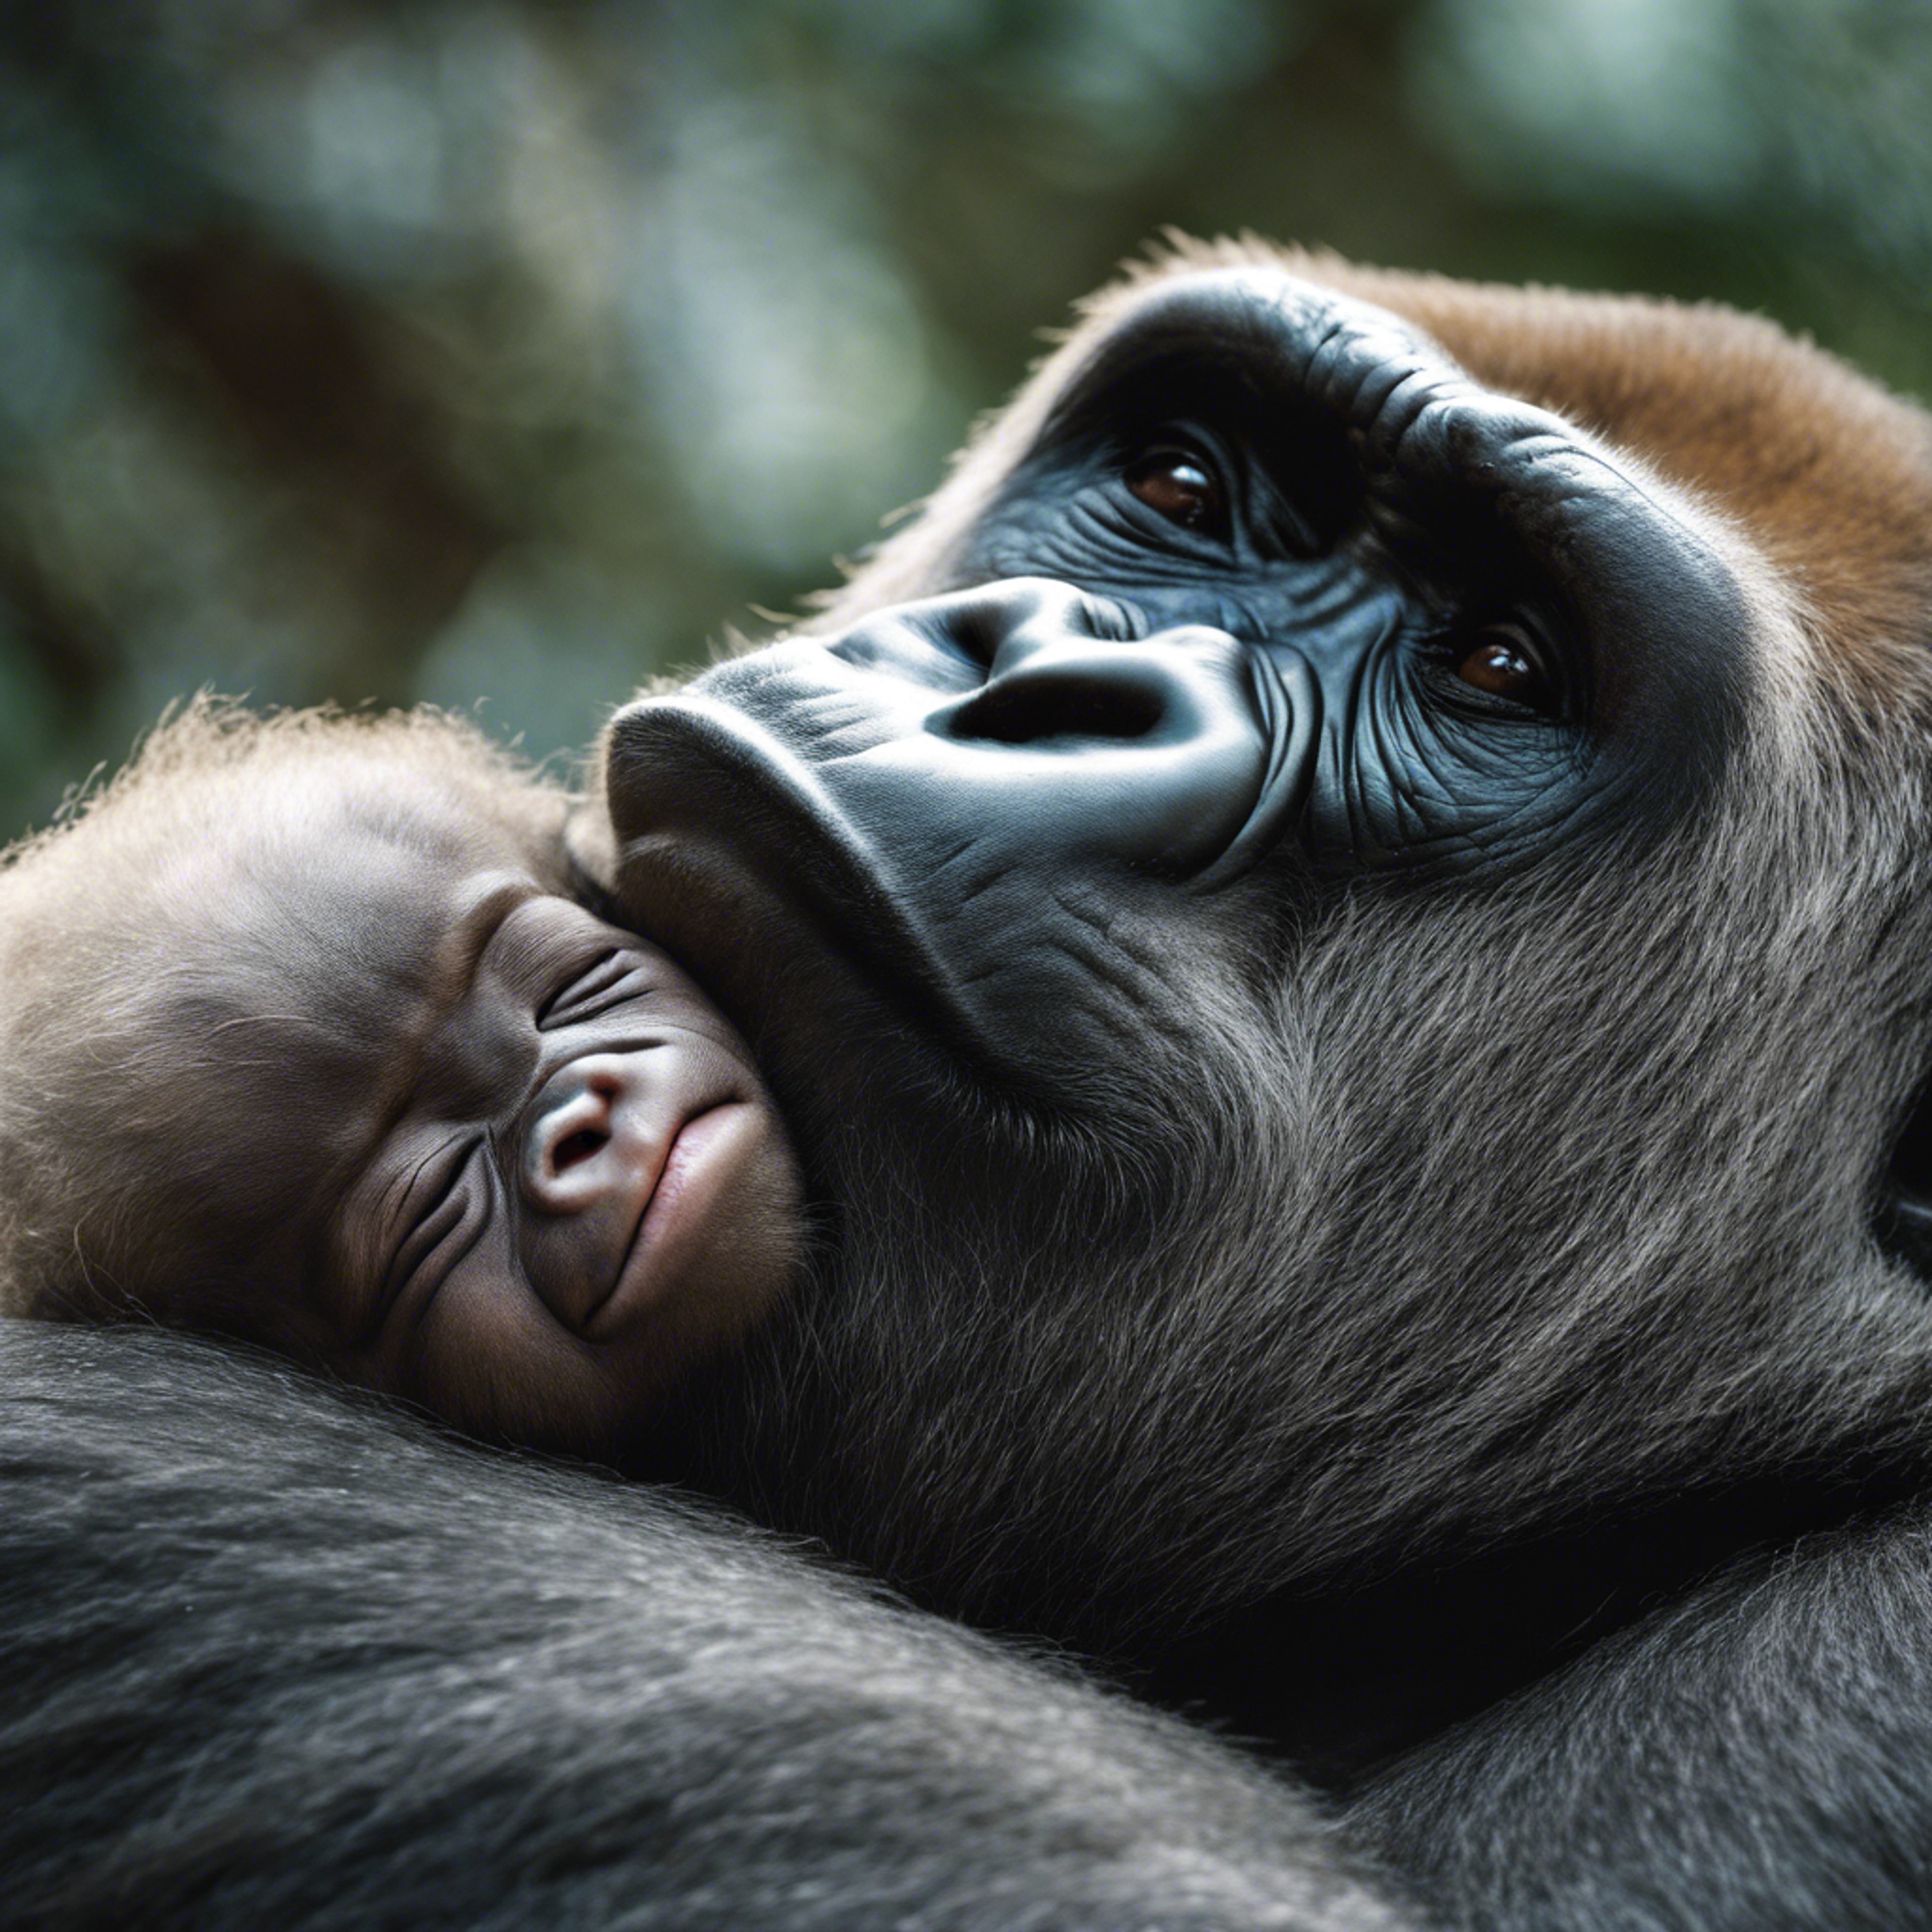 A close-up, emotional study of a gorilla mother's face as she cradles her sleeping newborn. Обои[516e0f2ed6254482ad03]